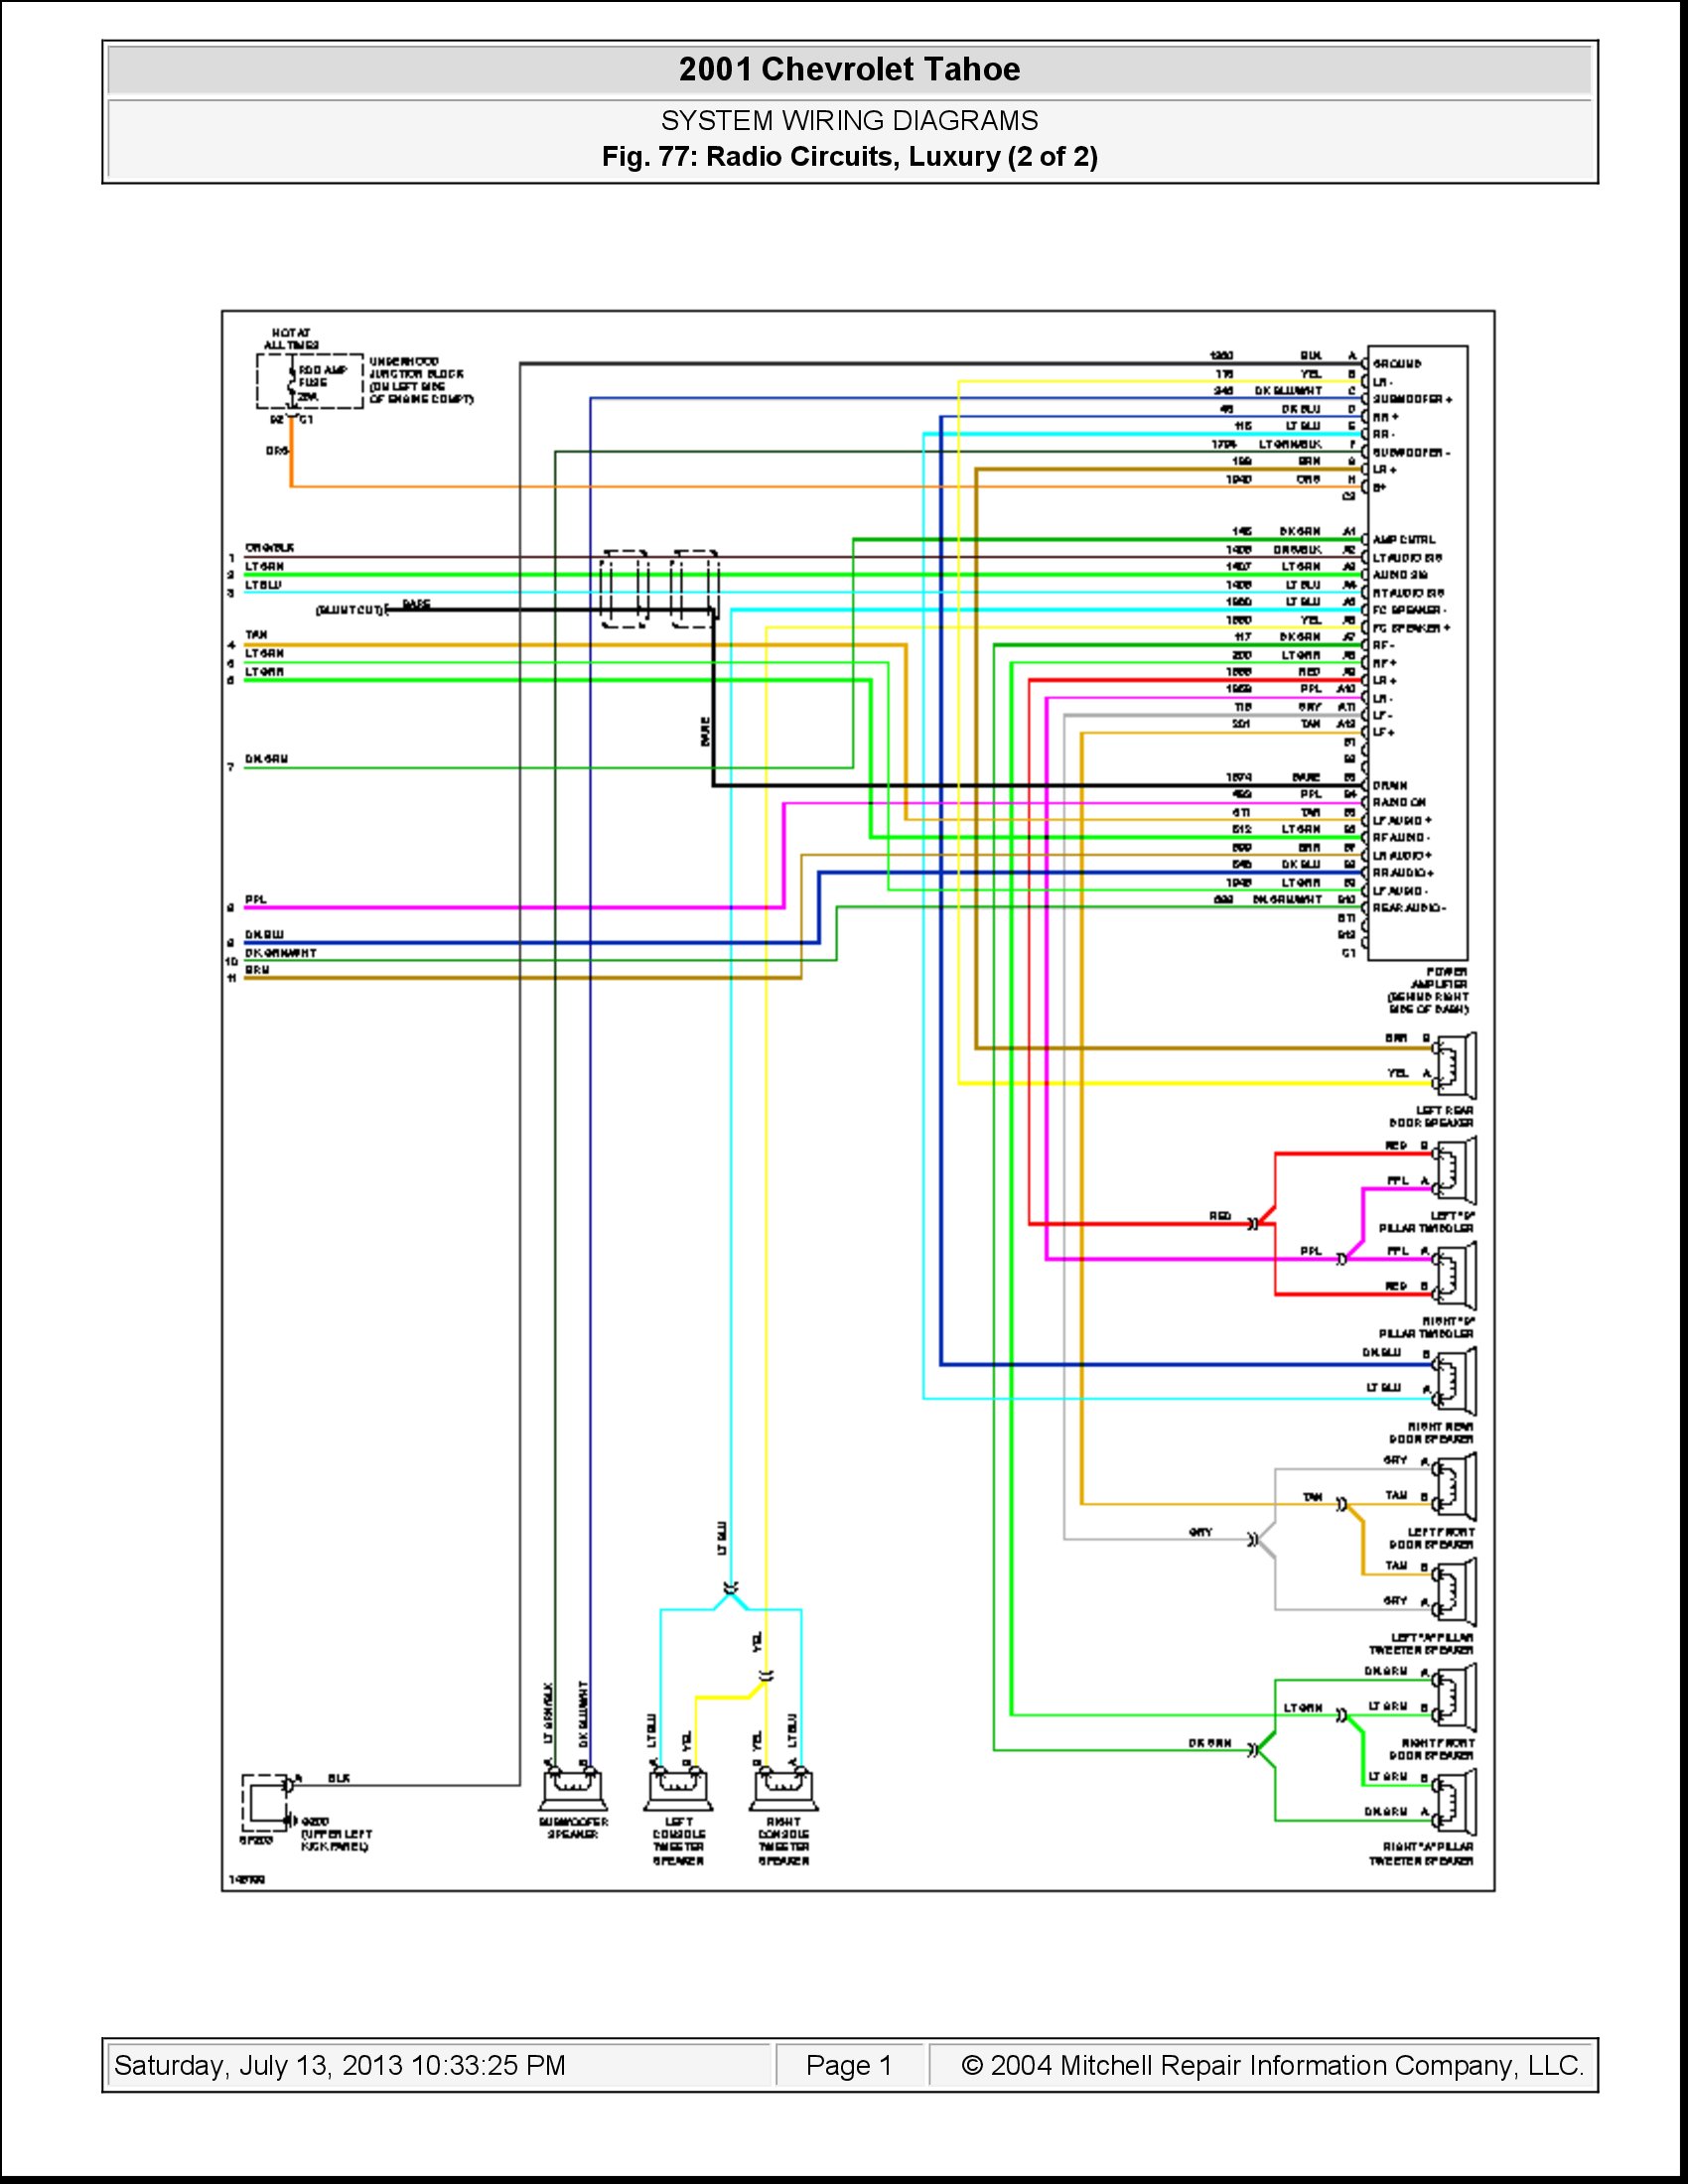 Car Stereo Speaker Wiring Diagram from wiringall.com